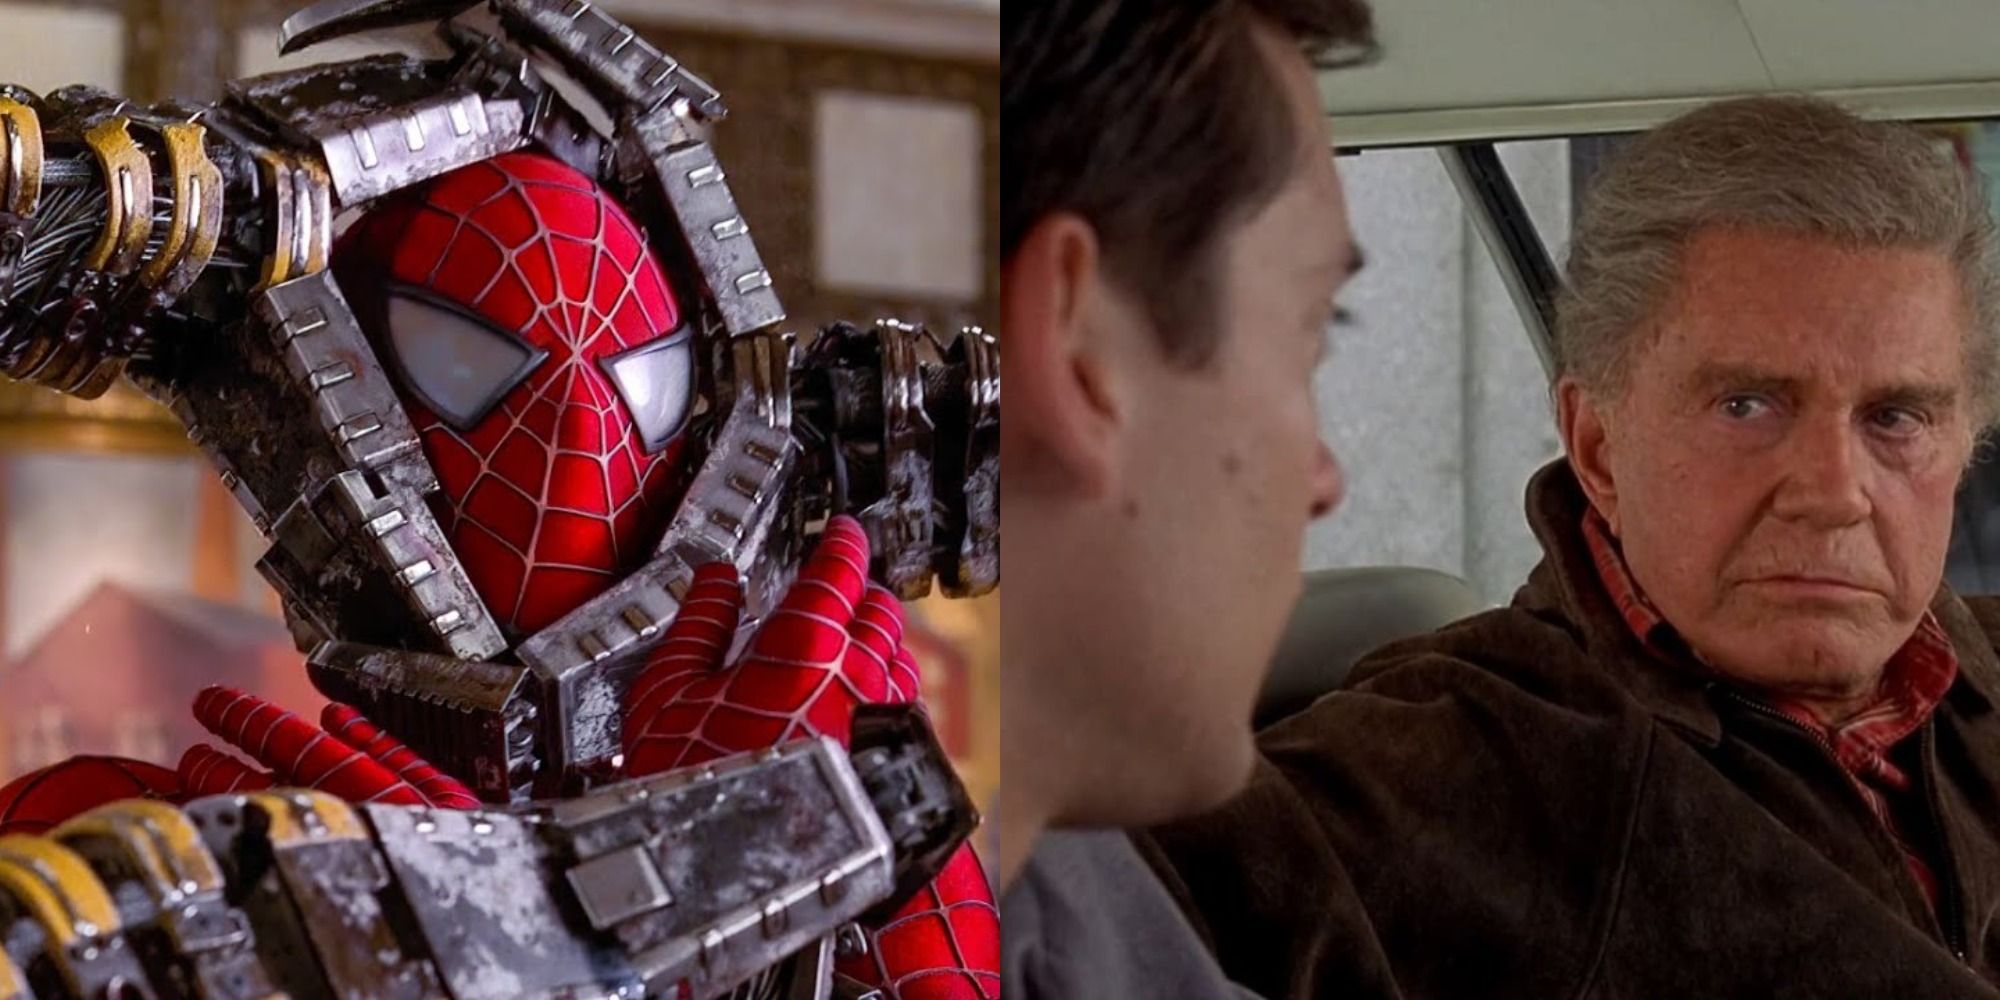 10 Scenes From Sam Raimi’s SpiderMan Trilogy That Get Better Over Time